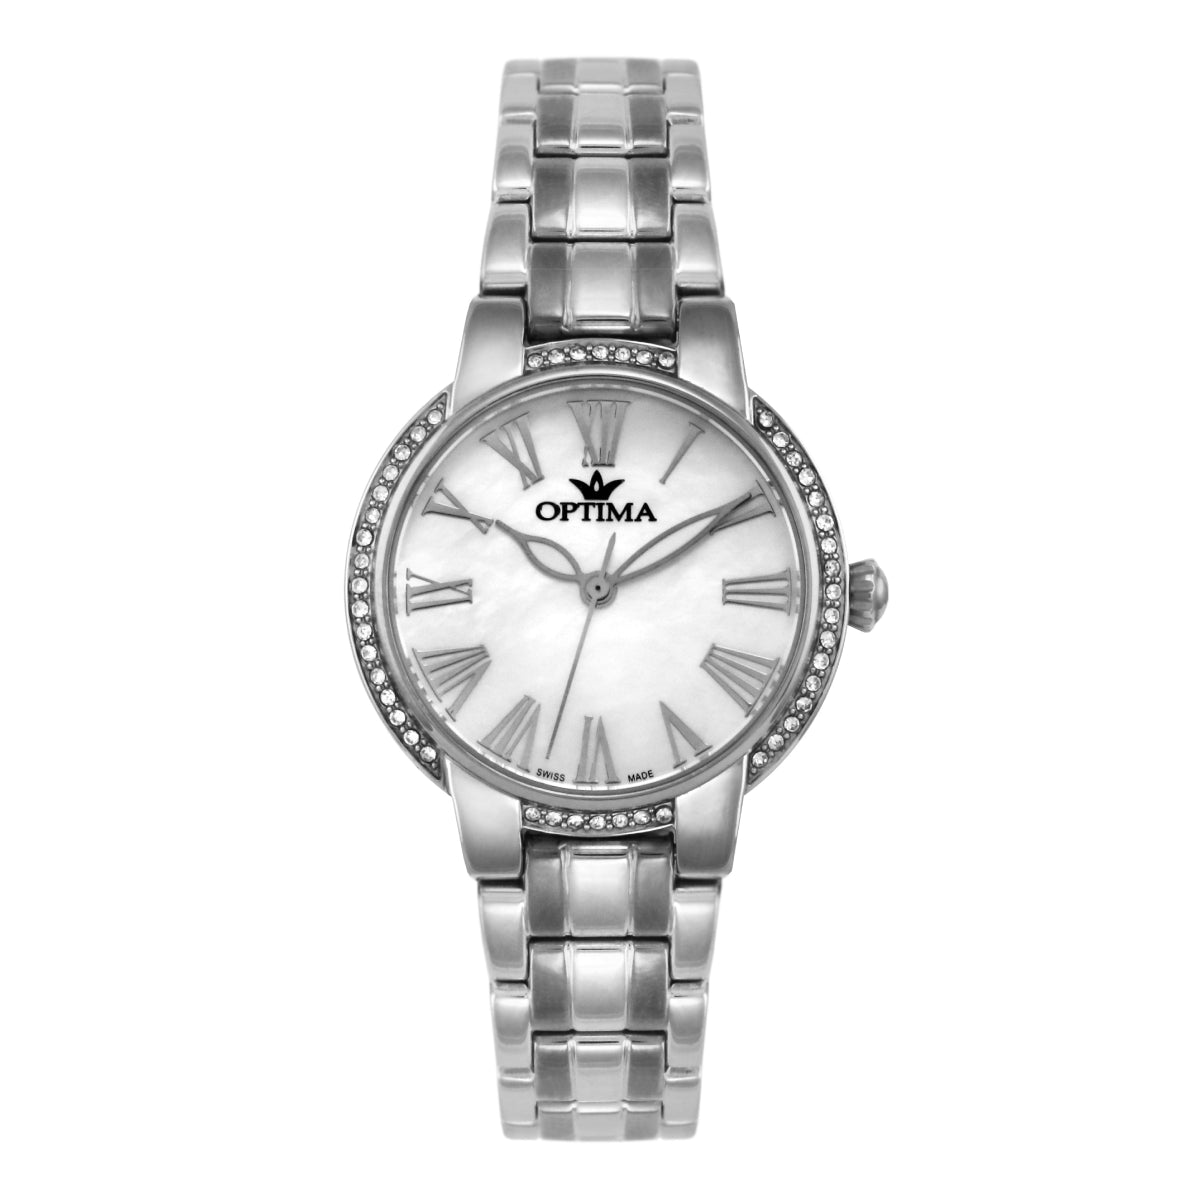 Optima Women's Swiss Quartz Watch with Pearly White Dial - OPT-0028